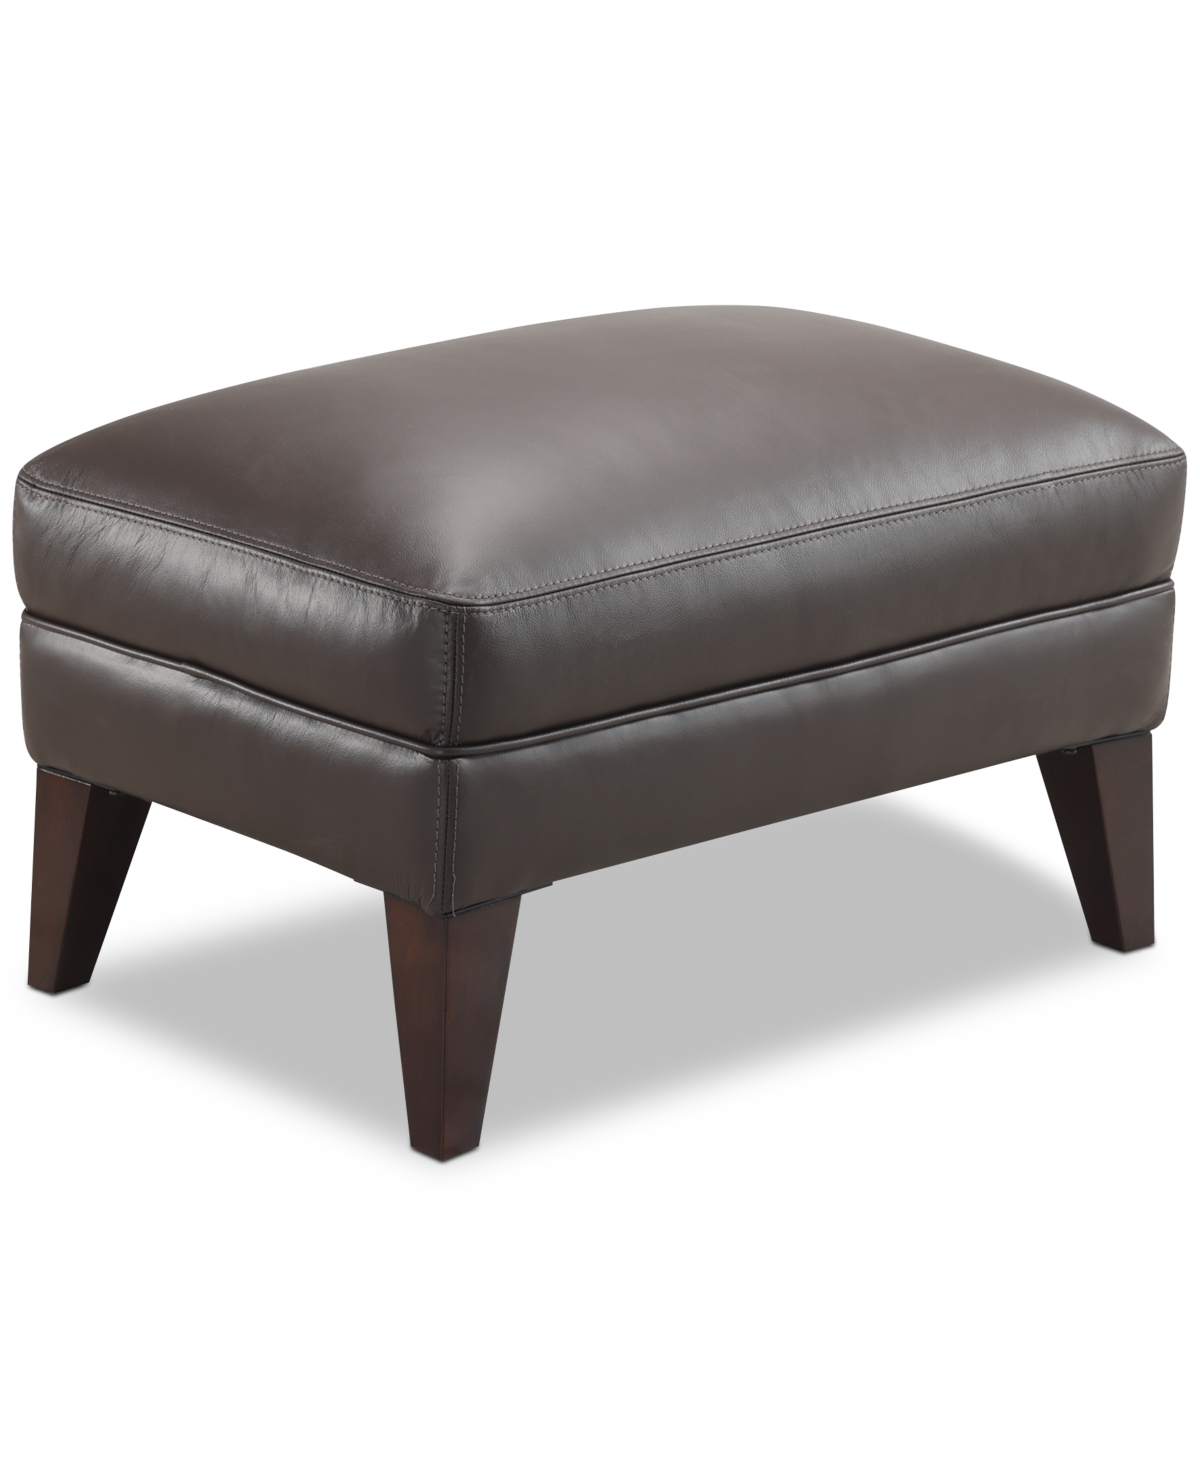 Furniture Closeout! Jazaria 31" Modern Leather Ottoman, Created For Macy's In Aspen Brown